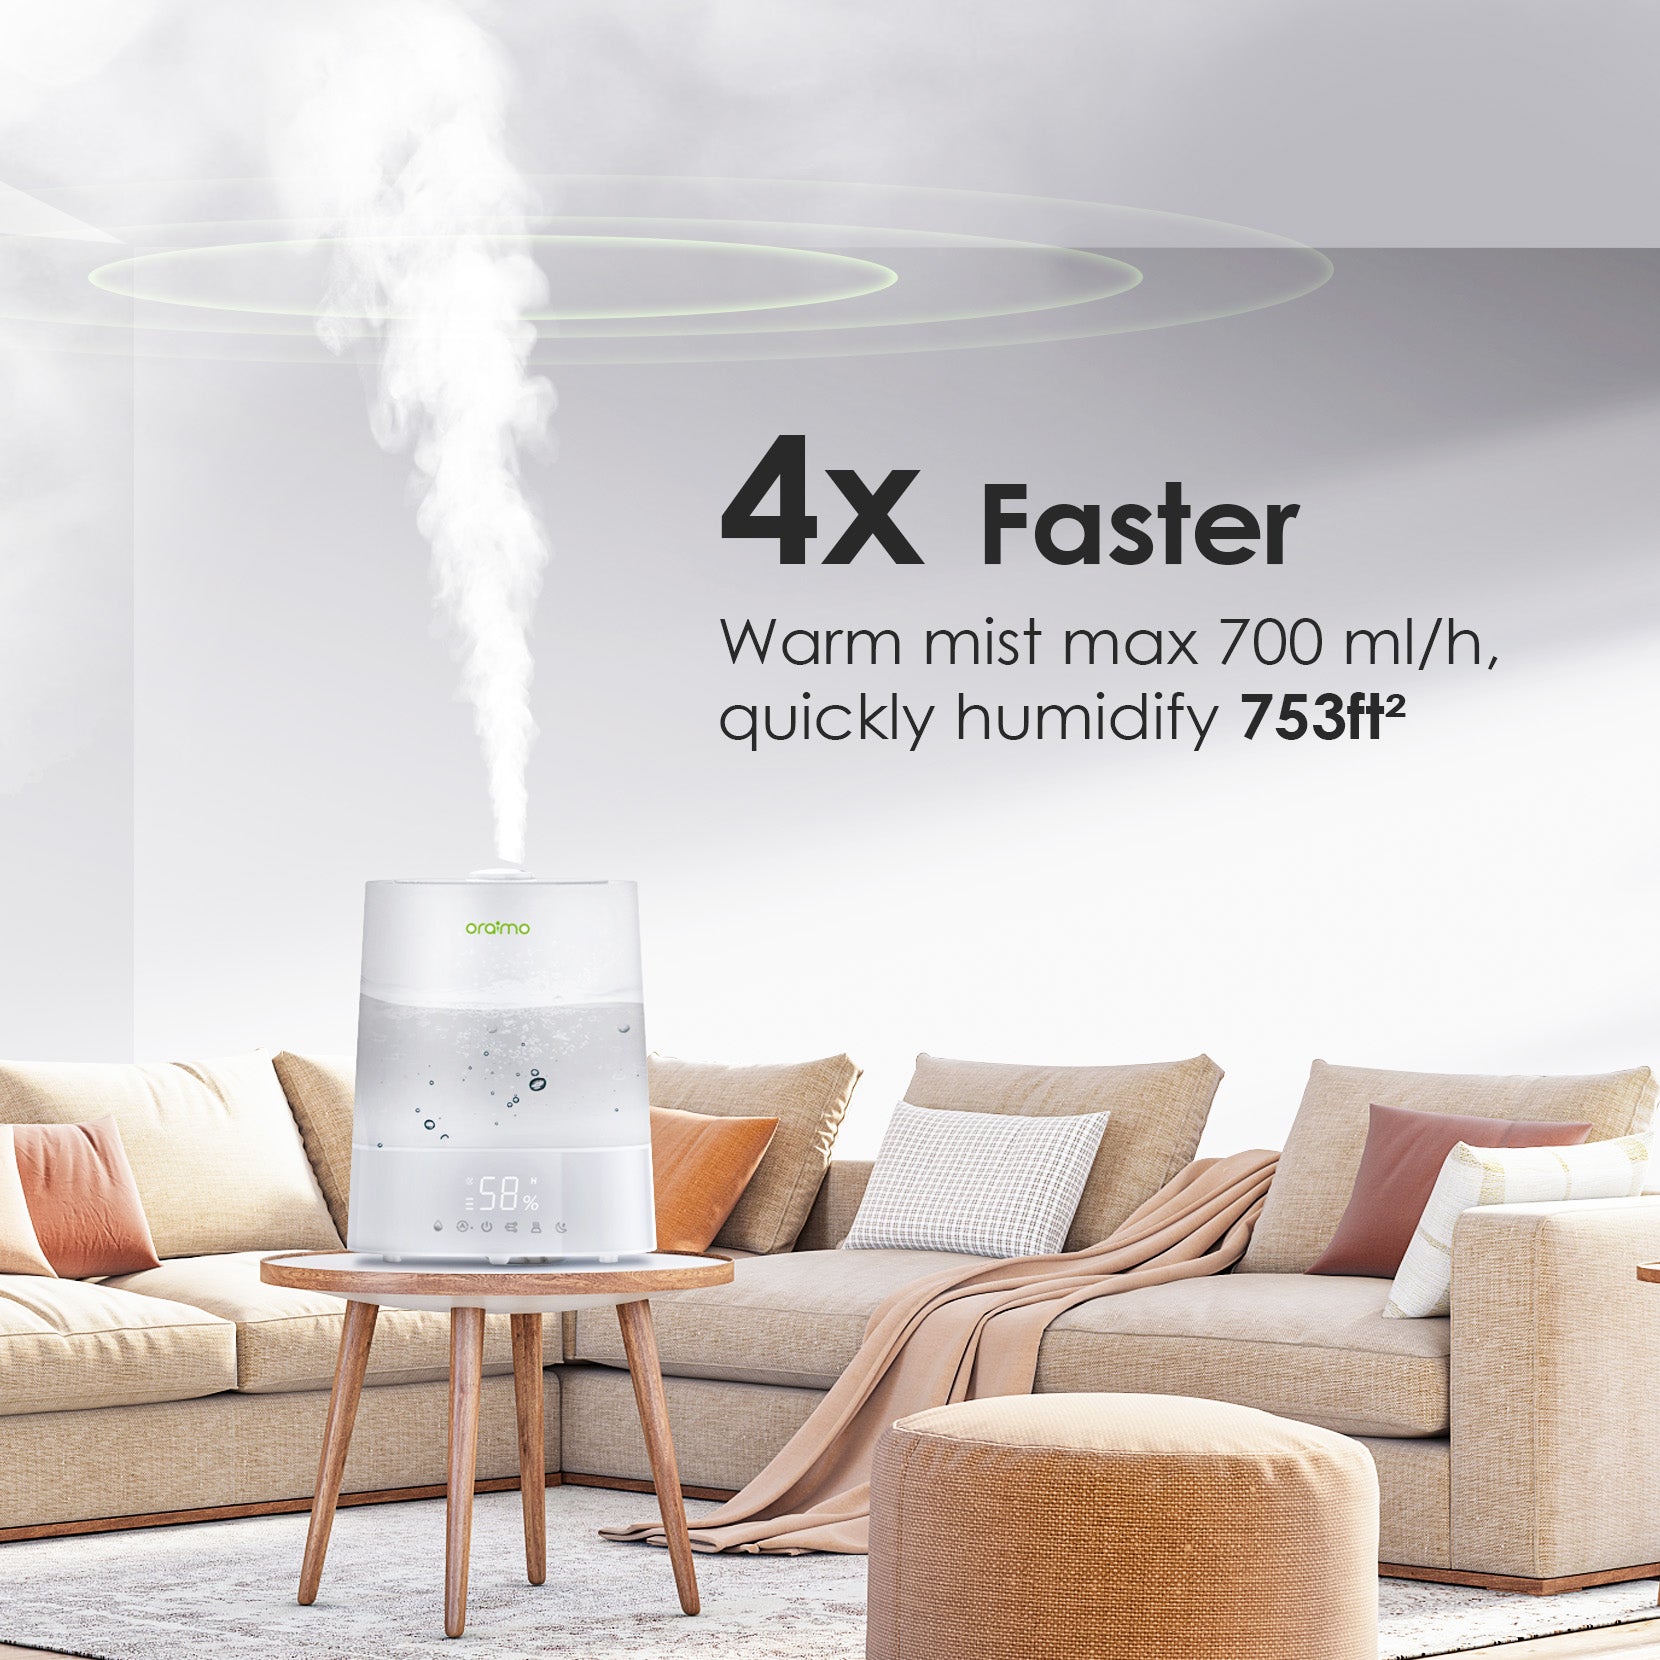 Oraimo 6L Humidifiers for Large Room